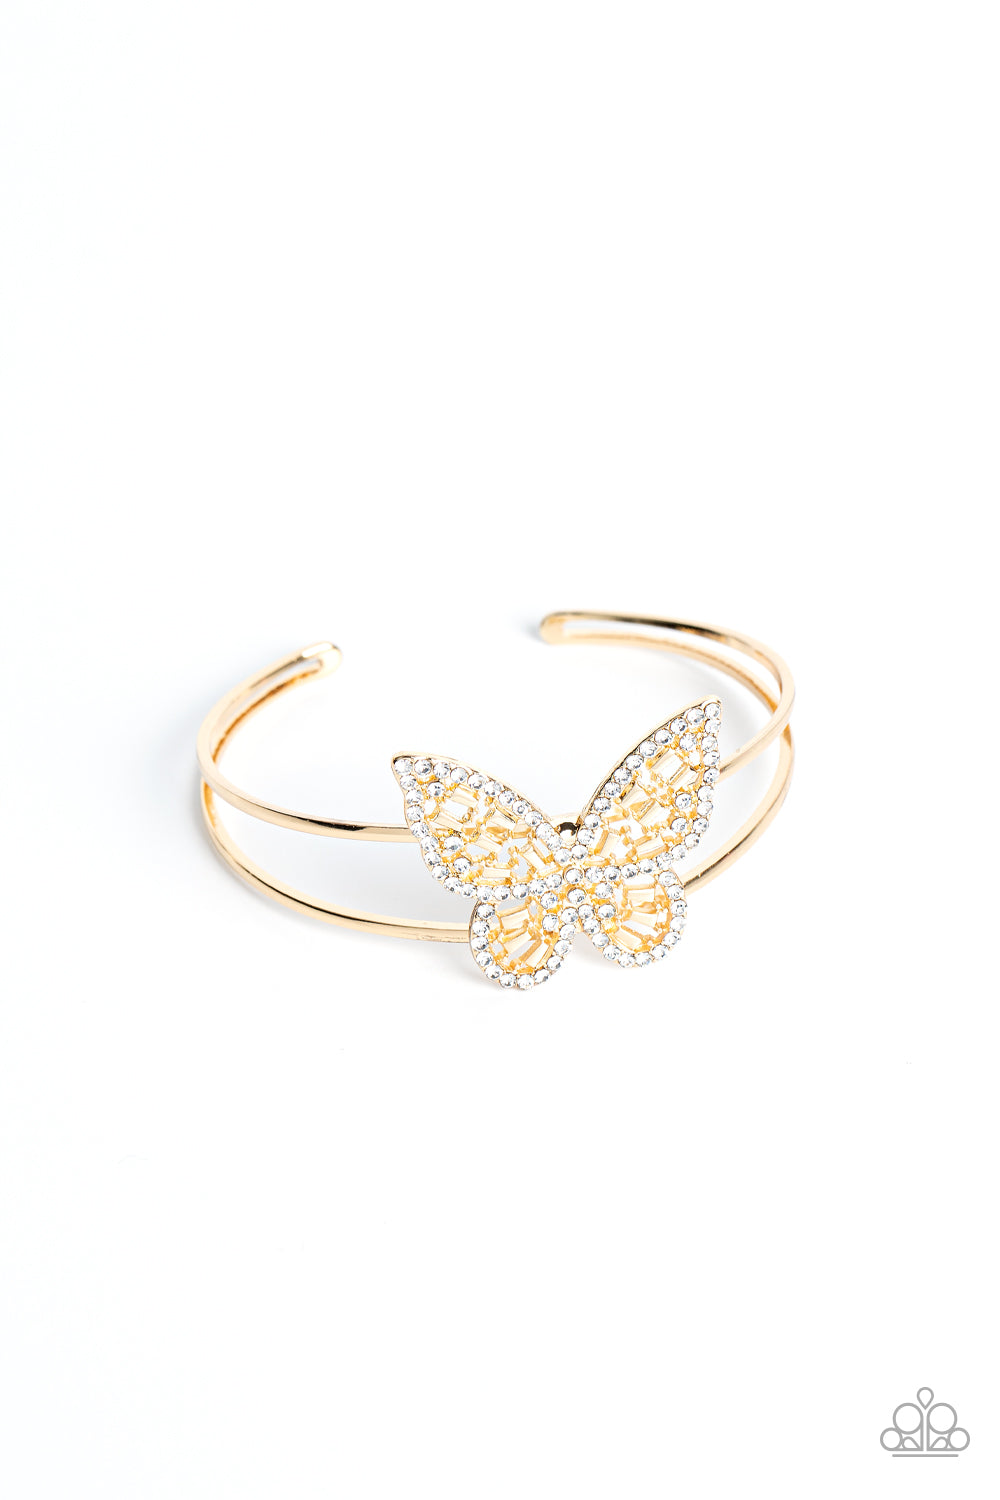 Paparazzi Butterfly Bella - Gold Butterfly Bracelets bordered in glassy white rhinestones, an airy gold butterfly is dotted in dainty white rhinestones and shiny gold emerald-like accents as it flutters atop a layered gold cuff for an enchanting fashion.  Sold as one individual bracelet.